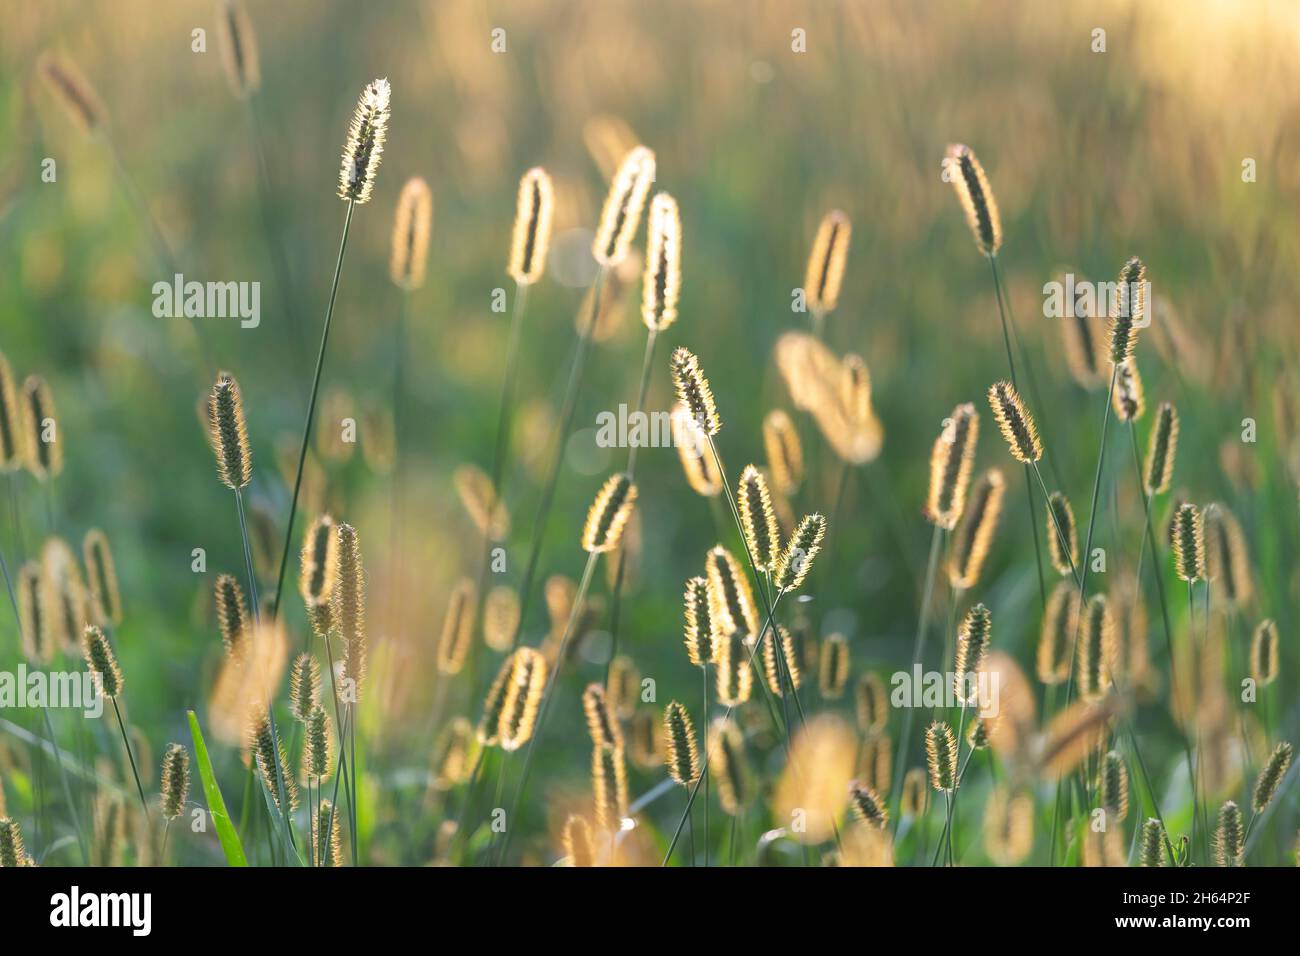 Outdoor grass stalks sunlit from behind with warm sunset light. Enchanting moment of summer. Stock Photo